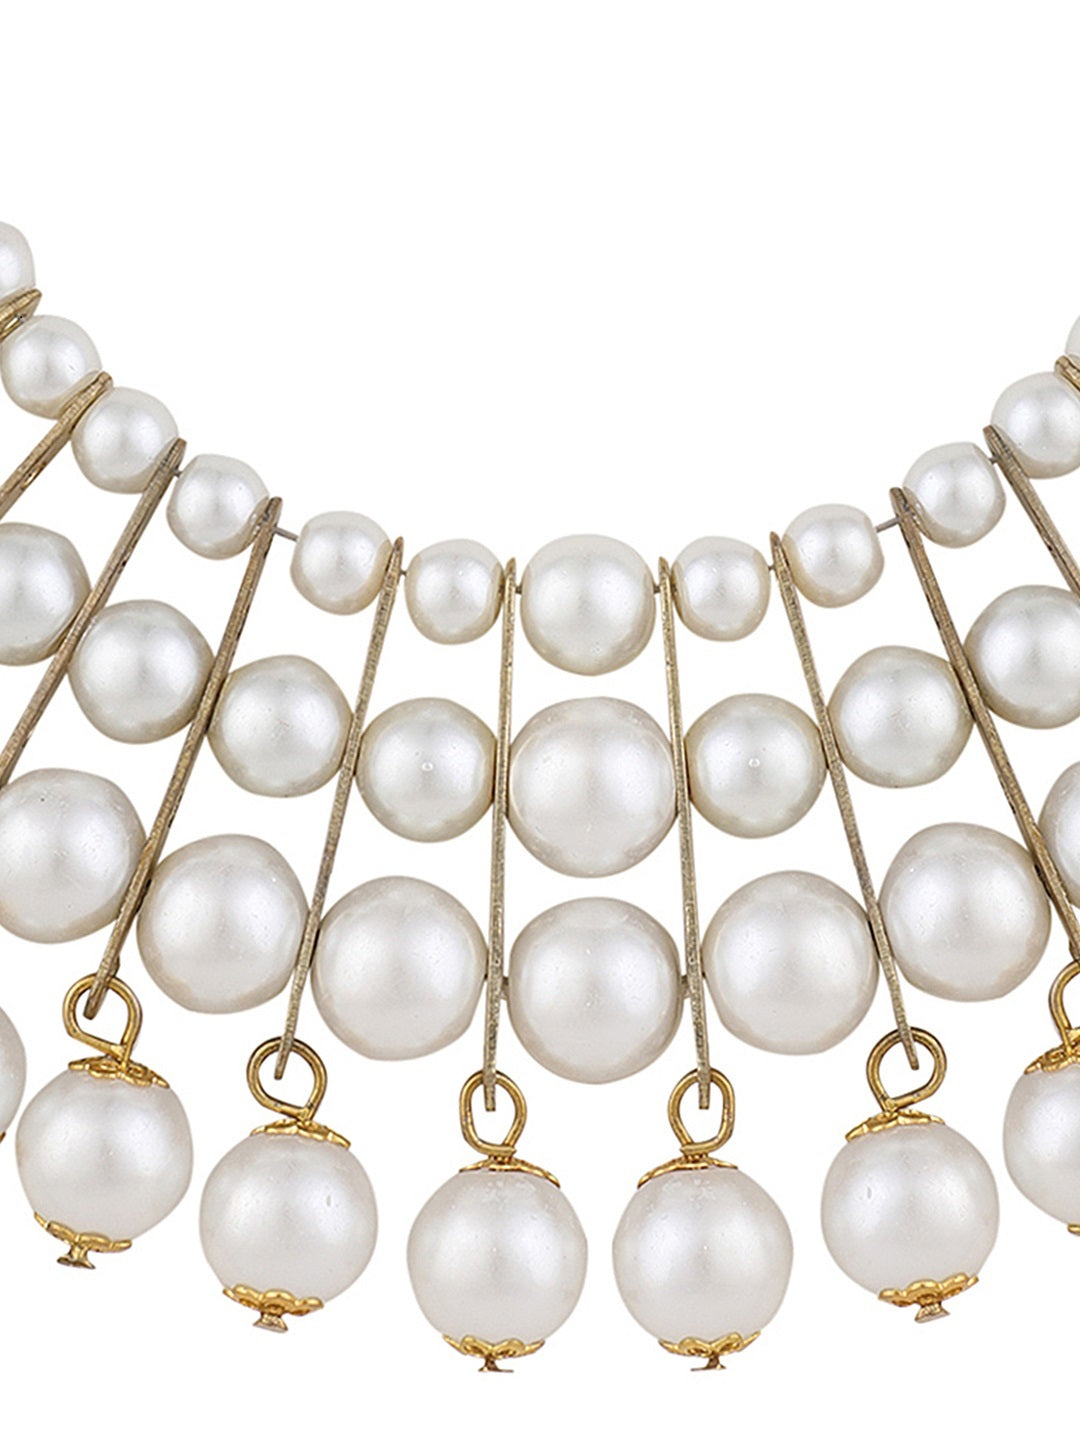 Women's Designer White Bead Stacked Gold-Plated Collar Necklace - Anikas Creation